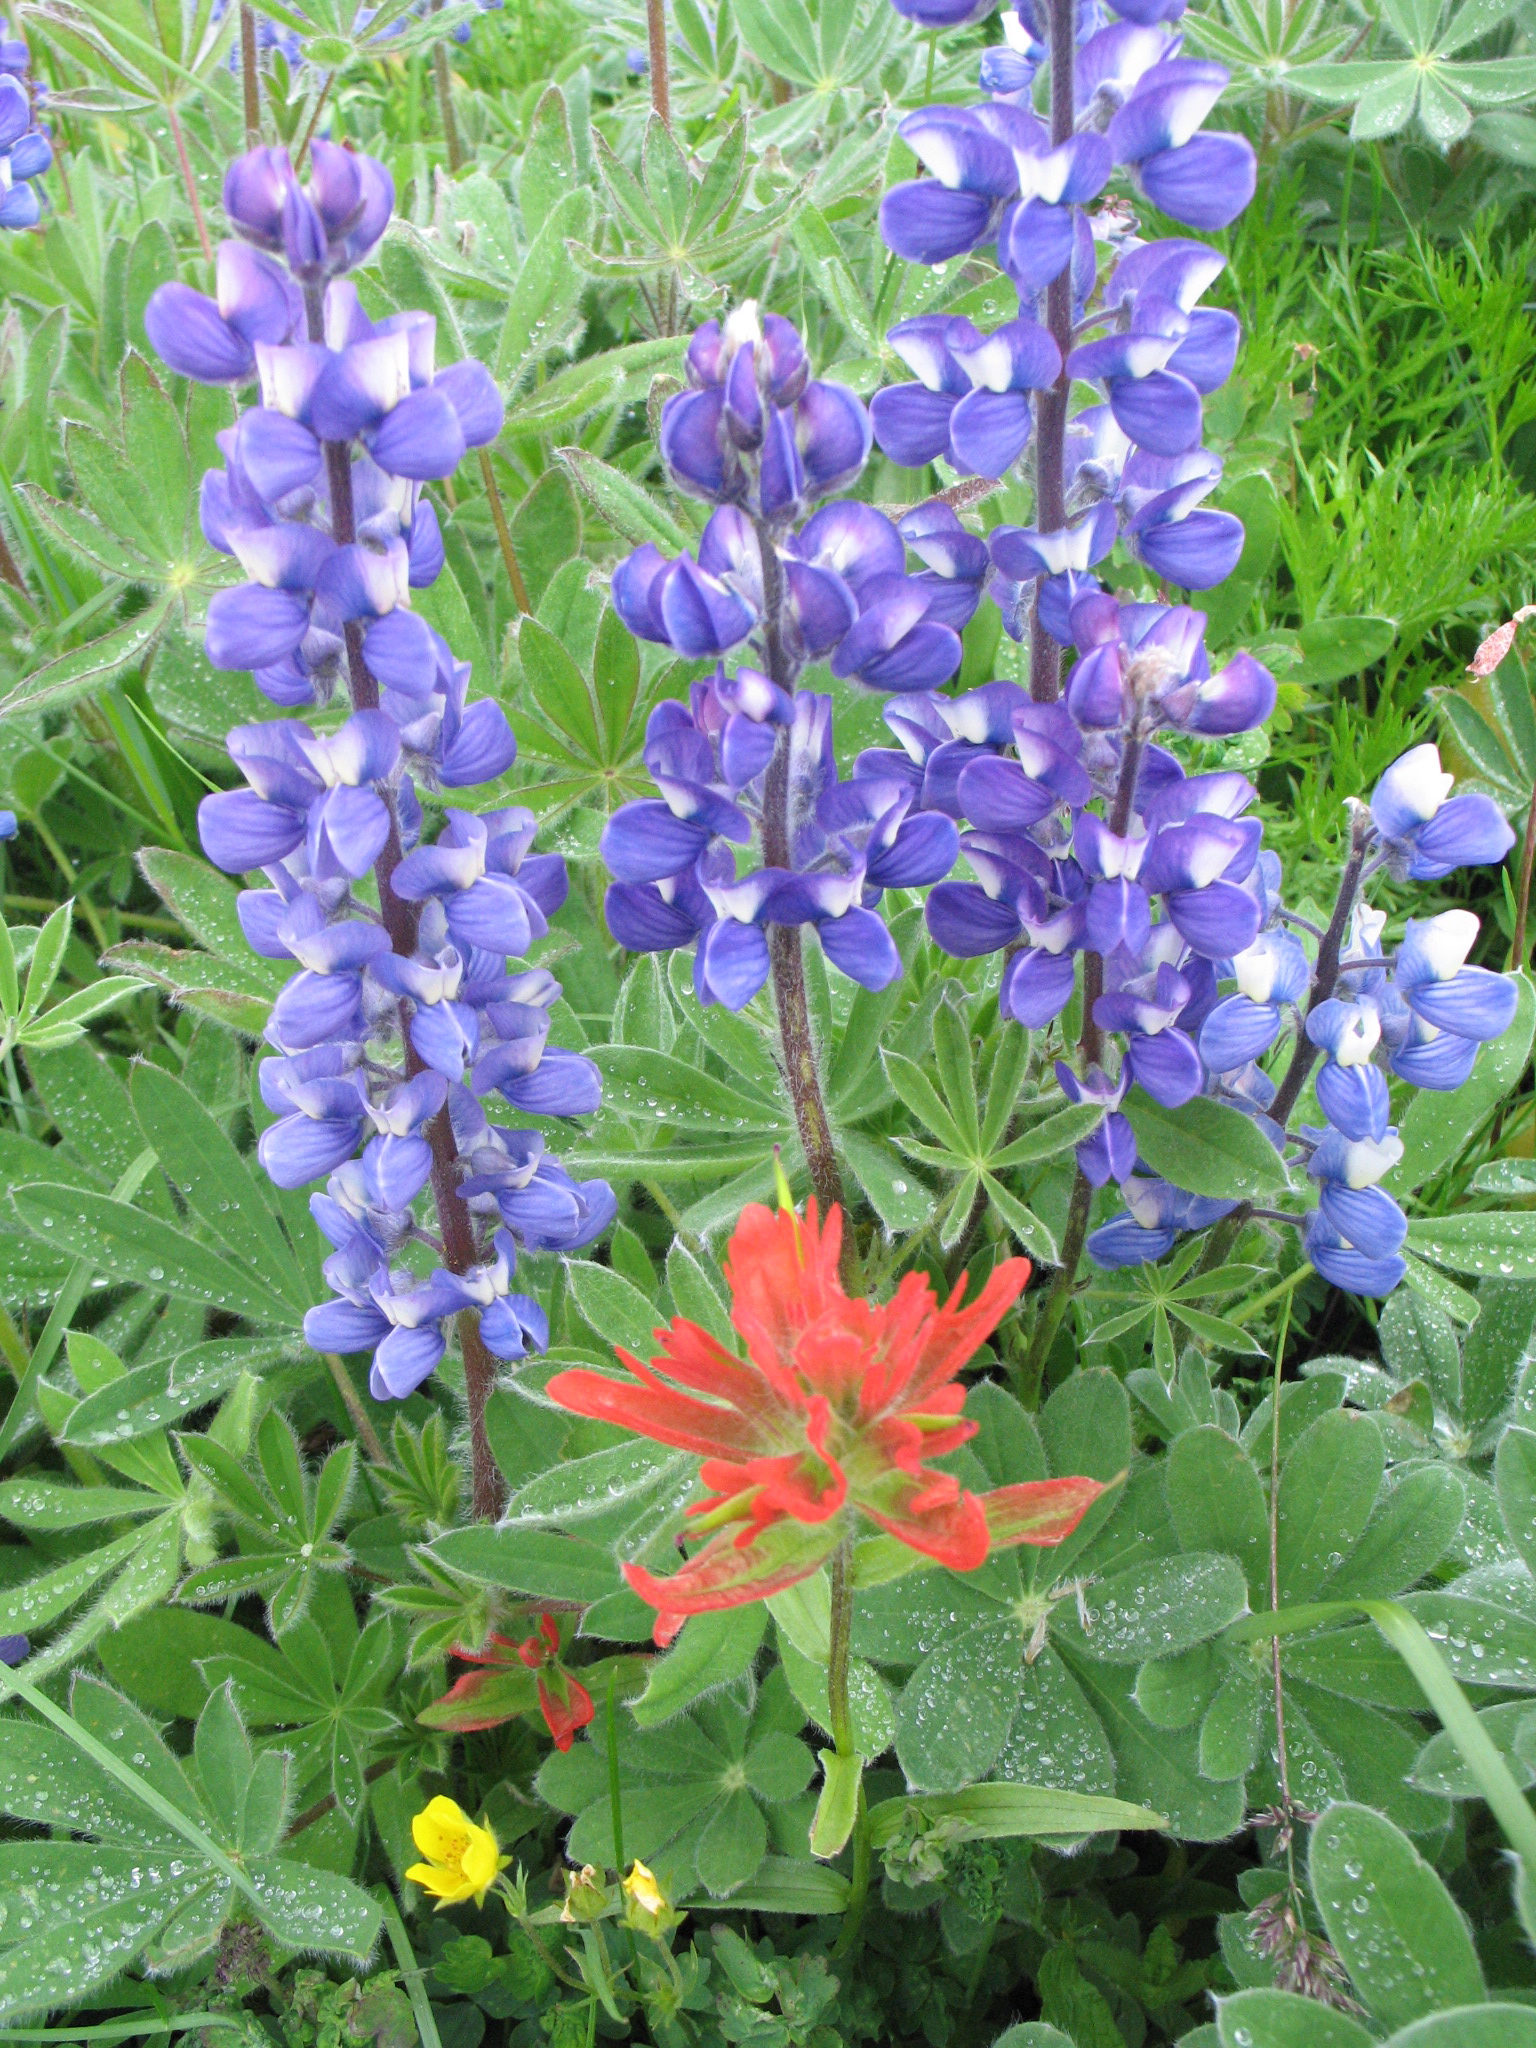 Arctic lupine and Indian Paintbrush  flowers in an alpine meadow.